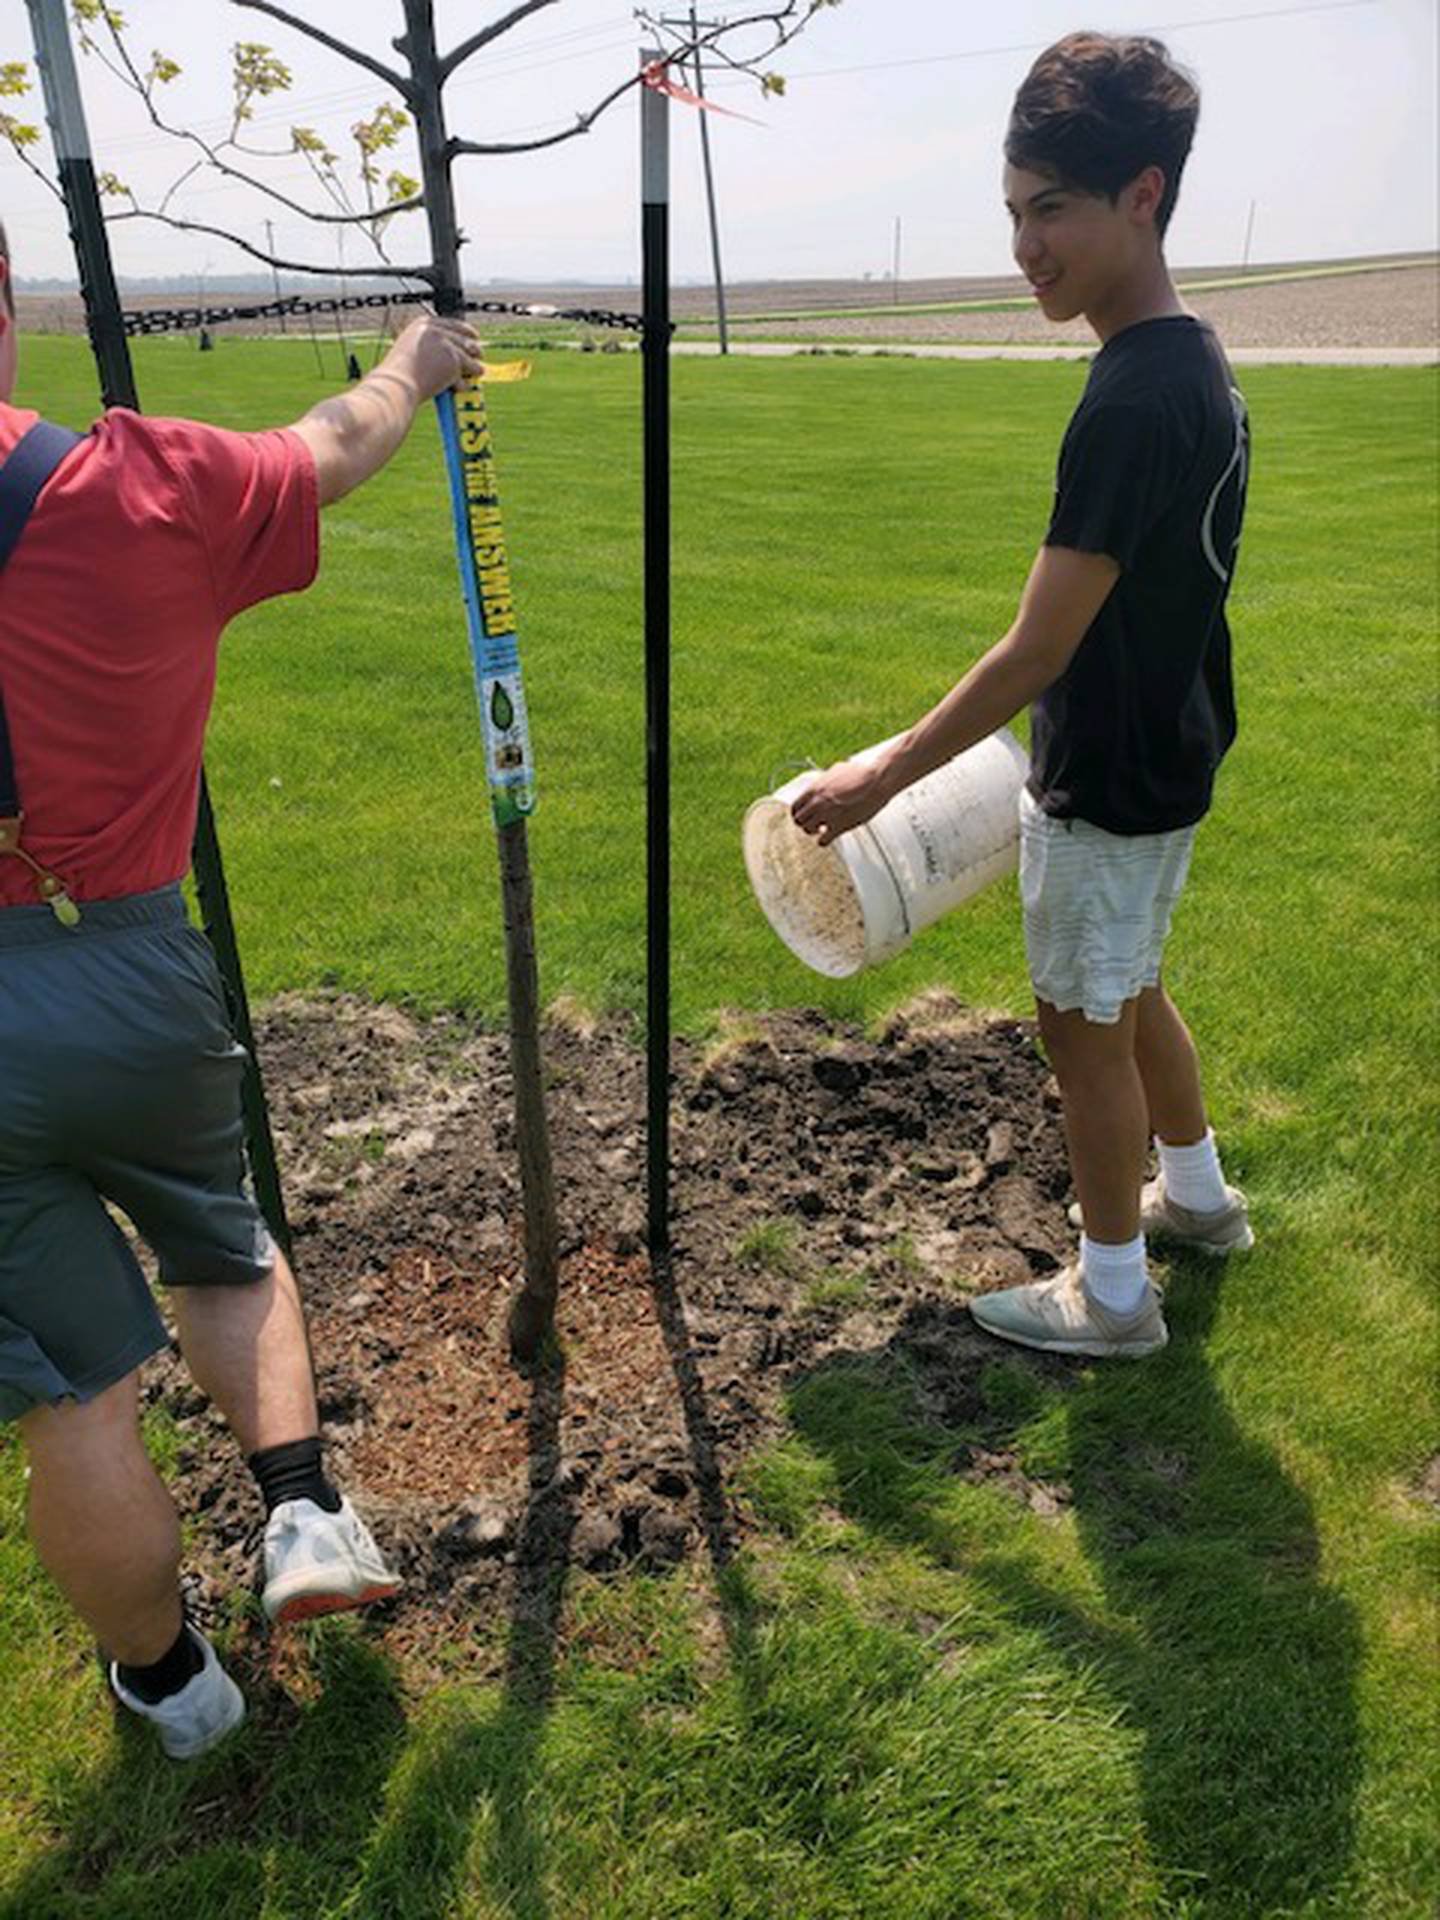 The purpose of the project is to provide additional trees to broaden the teaching and research possibilities for academic classes, to improve the view of the campus and to take advantage of the opportunity to memorialize staff members and others that have made contributions to the history of the school district.